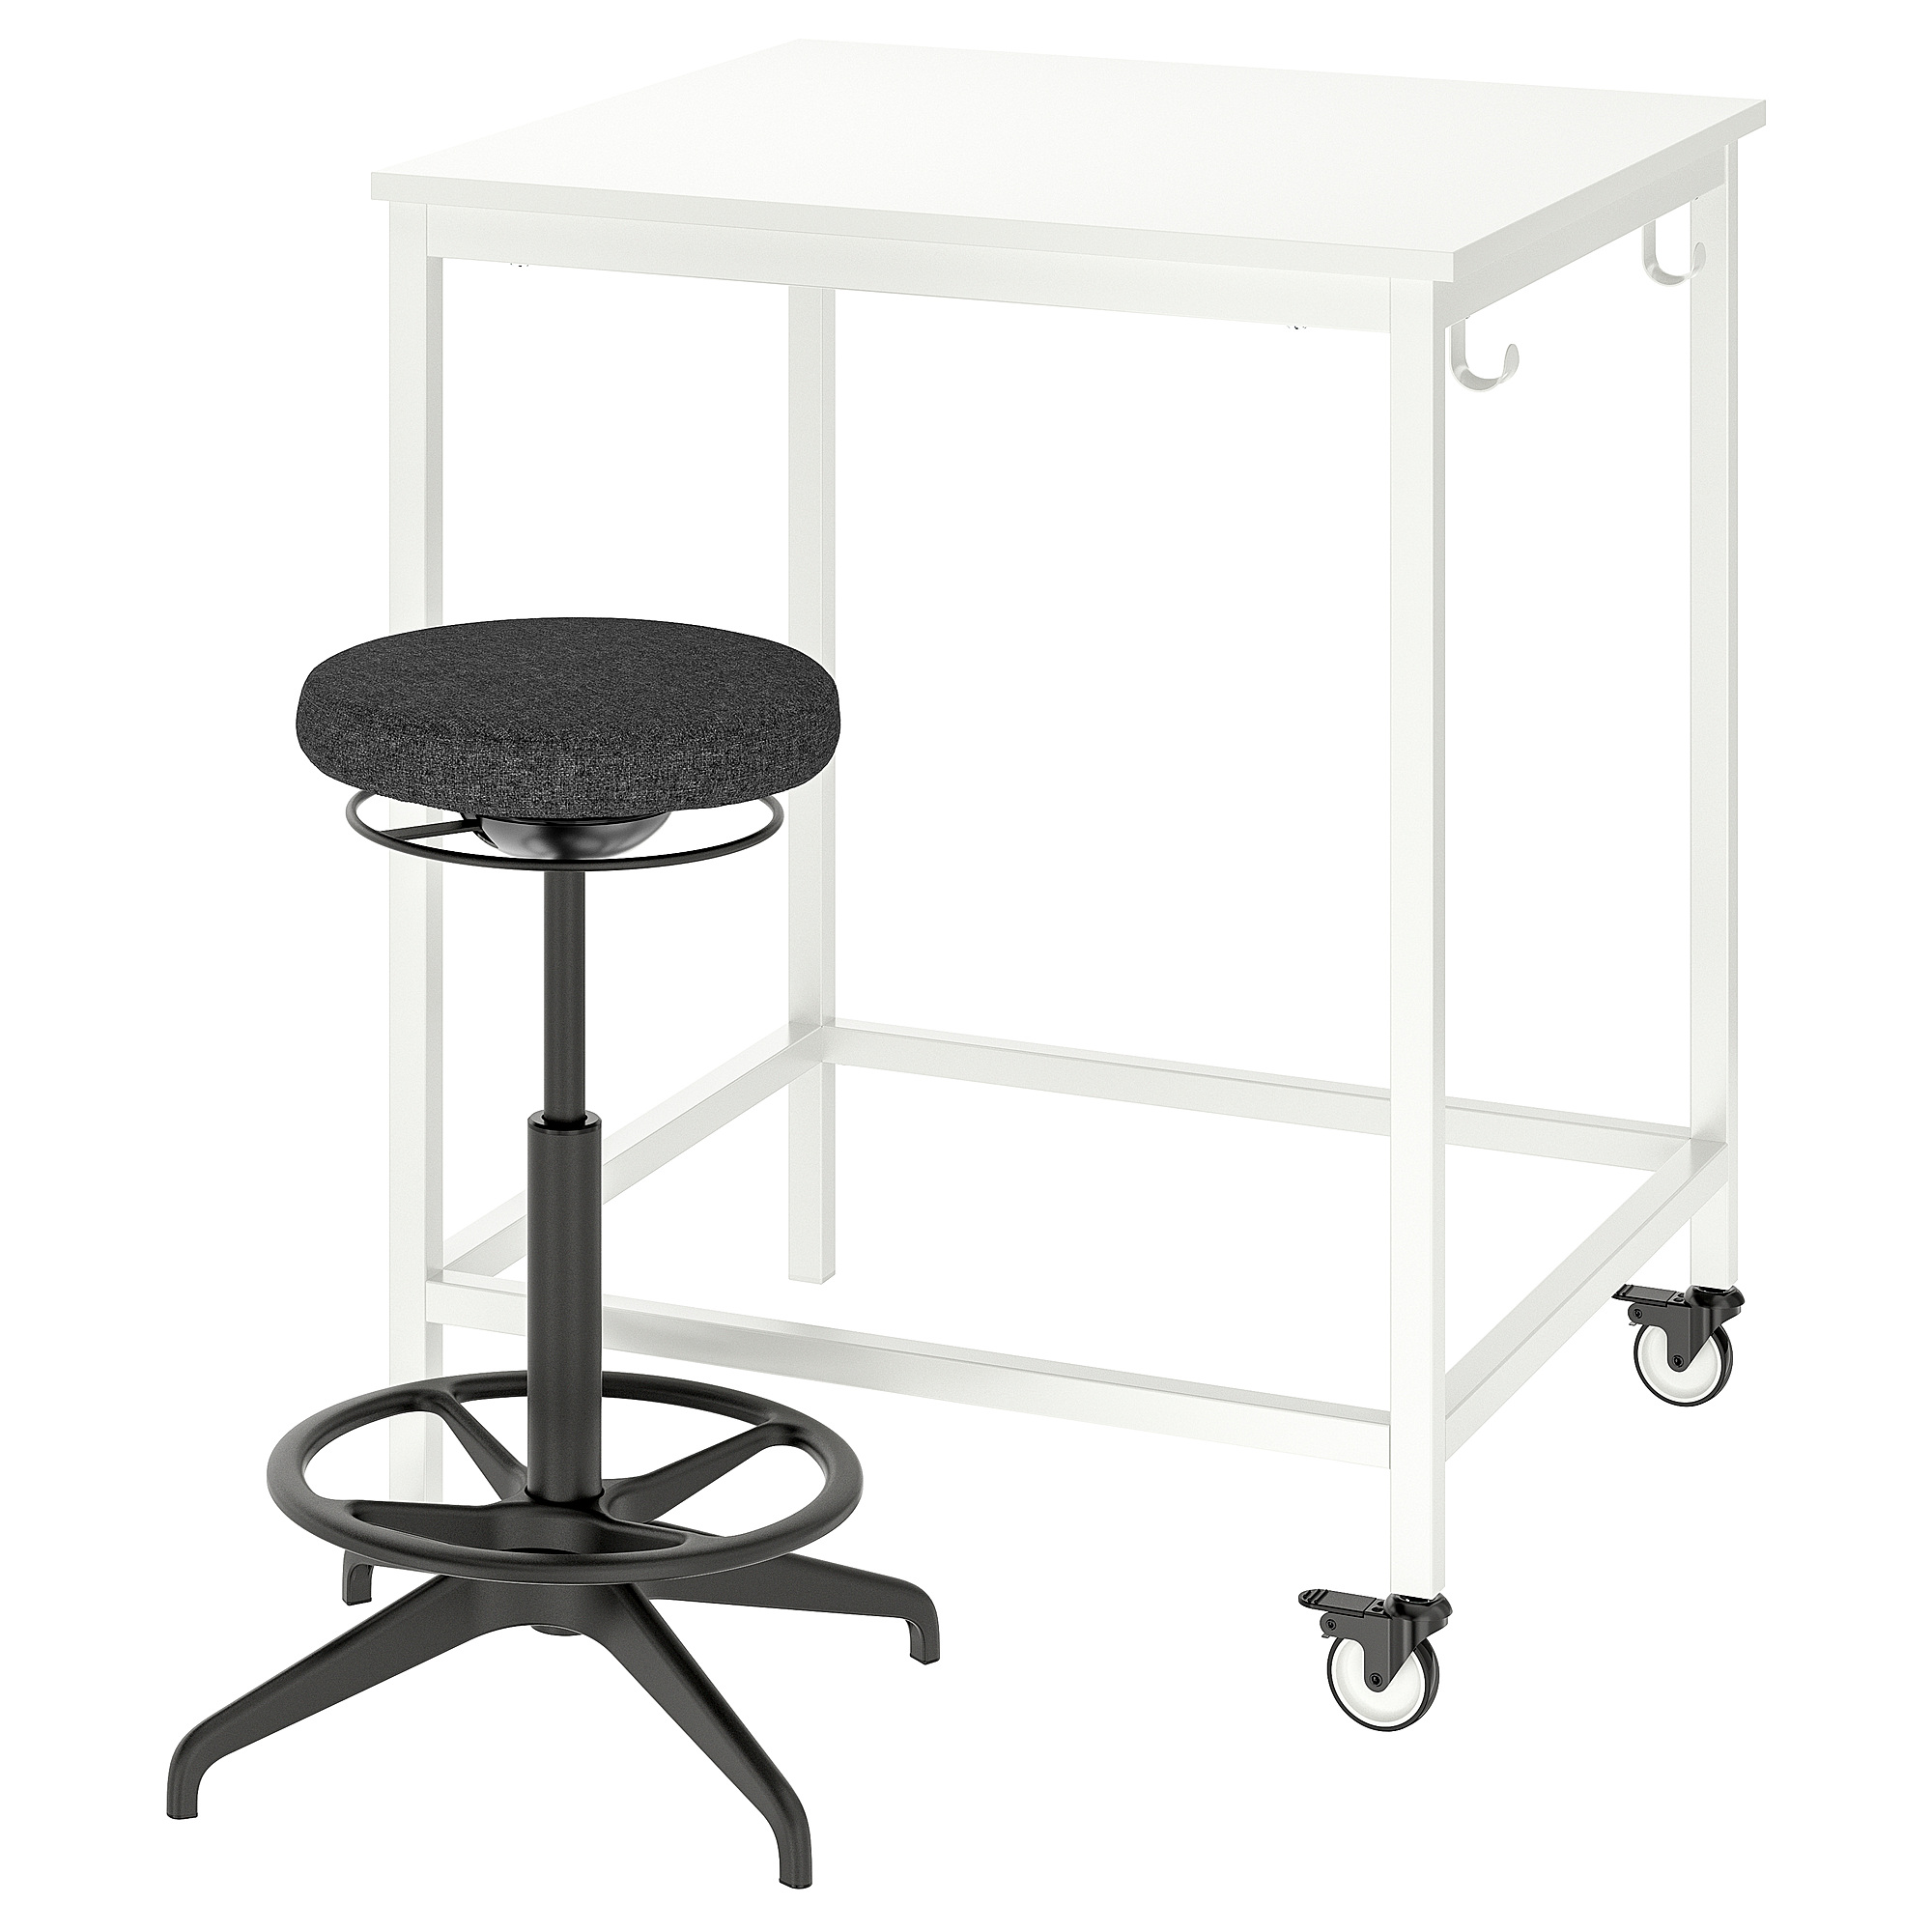 TROTTEN/LIDKULLEN table and sit/stand support